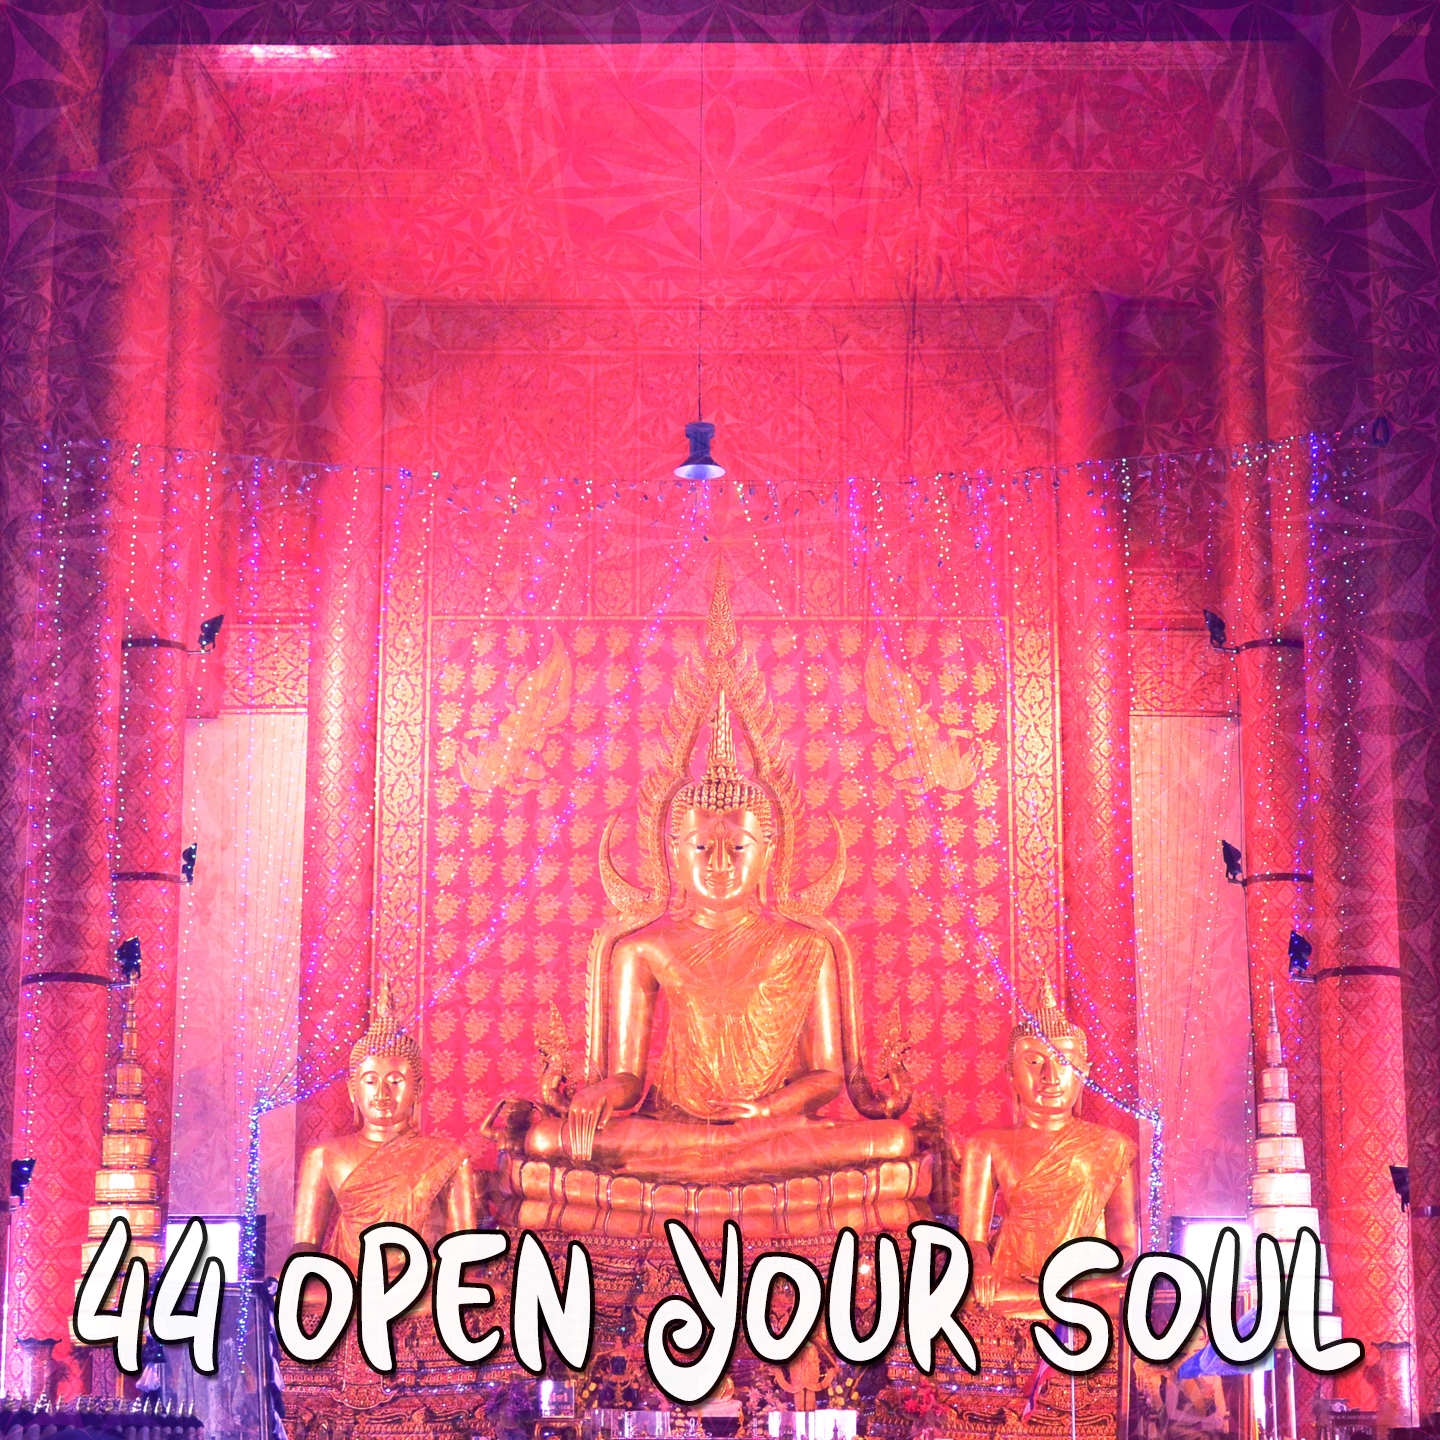 44 Open Your Soul